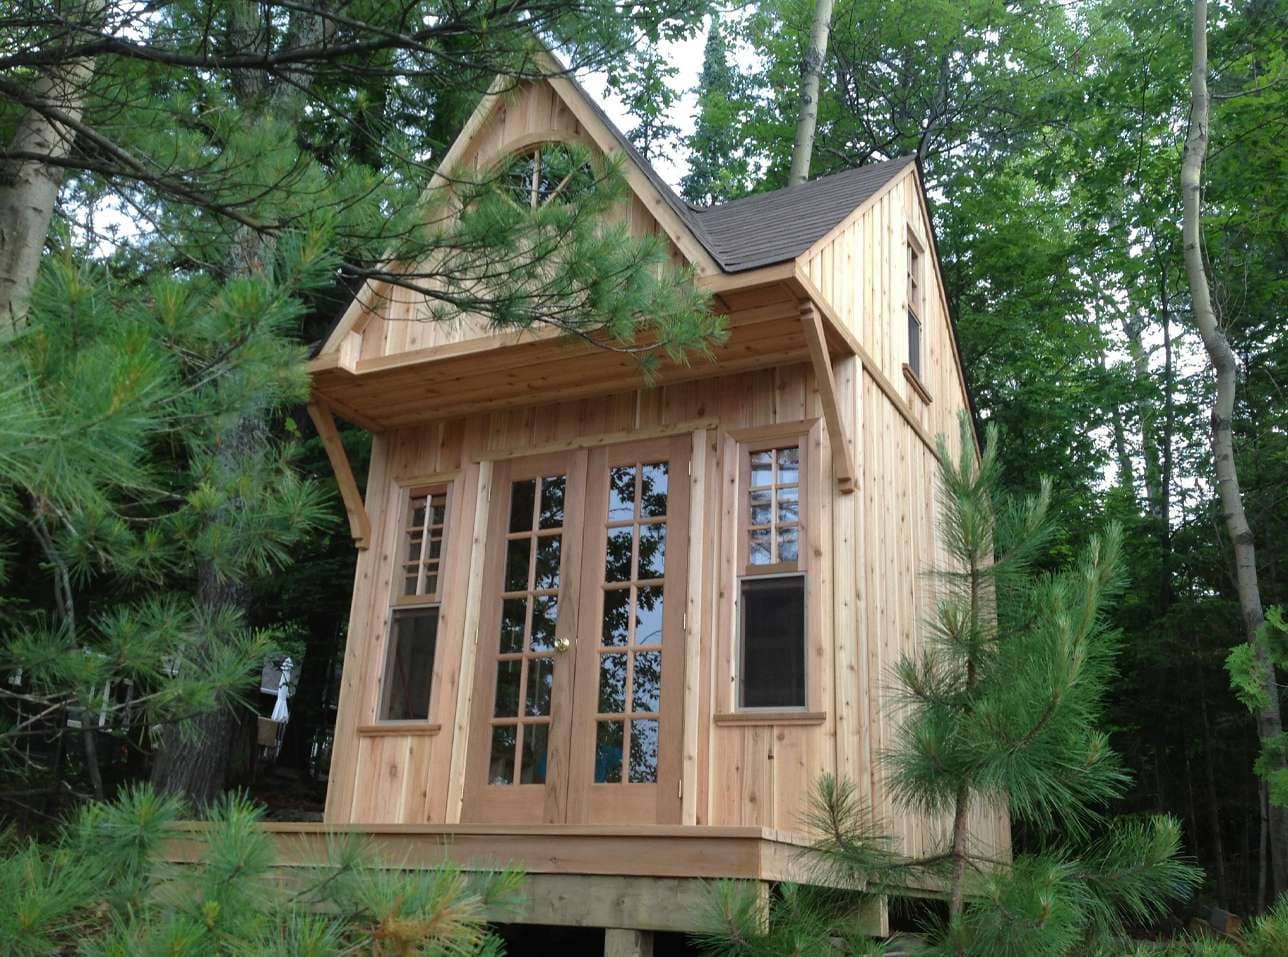 Custom Bala bunkie 10 x 10 with double french doors in Ontario. ID number 165870-4